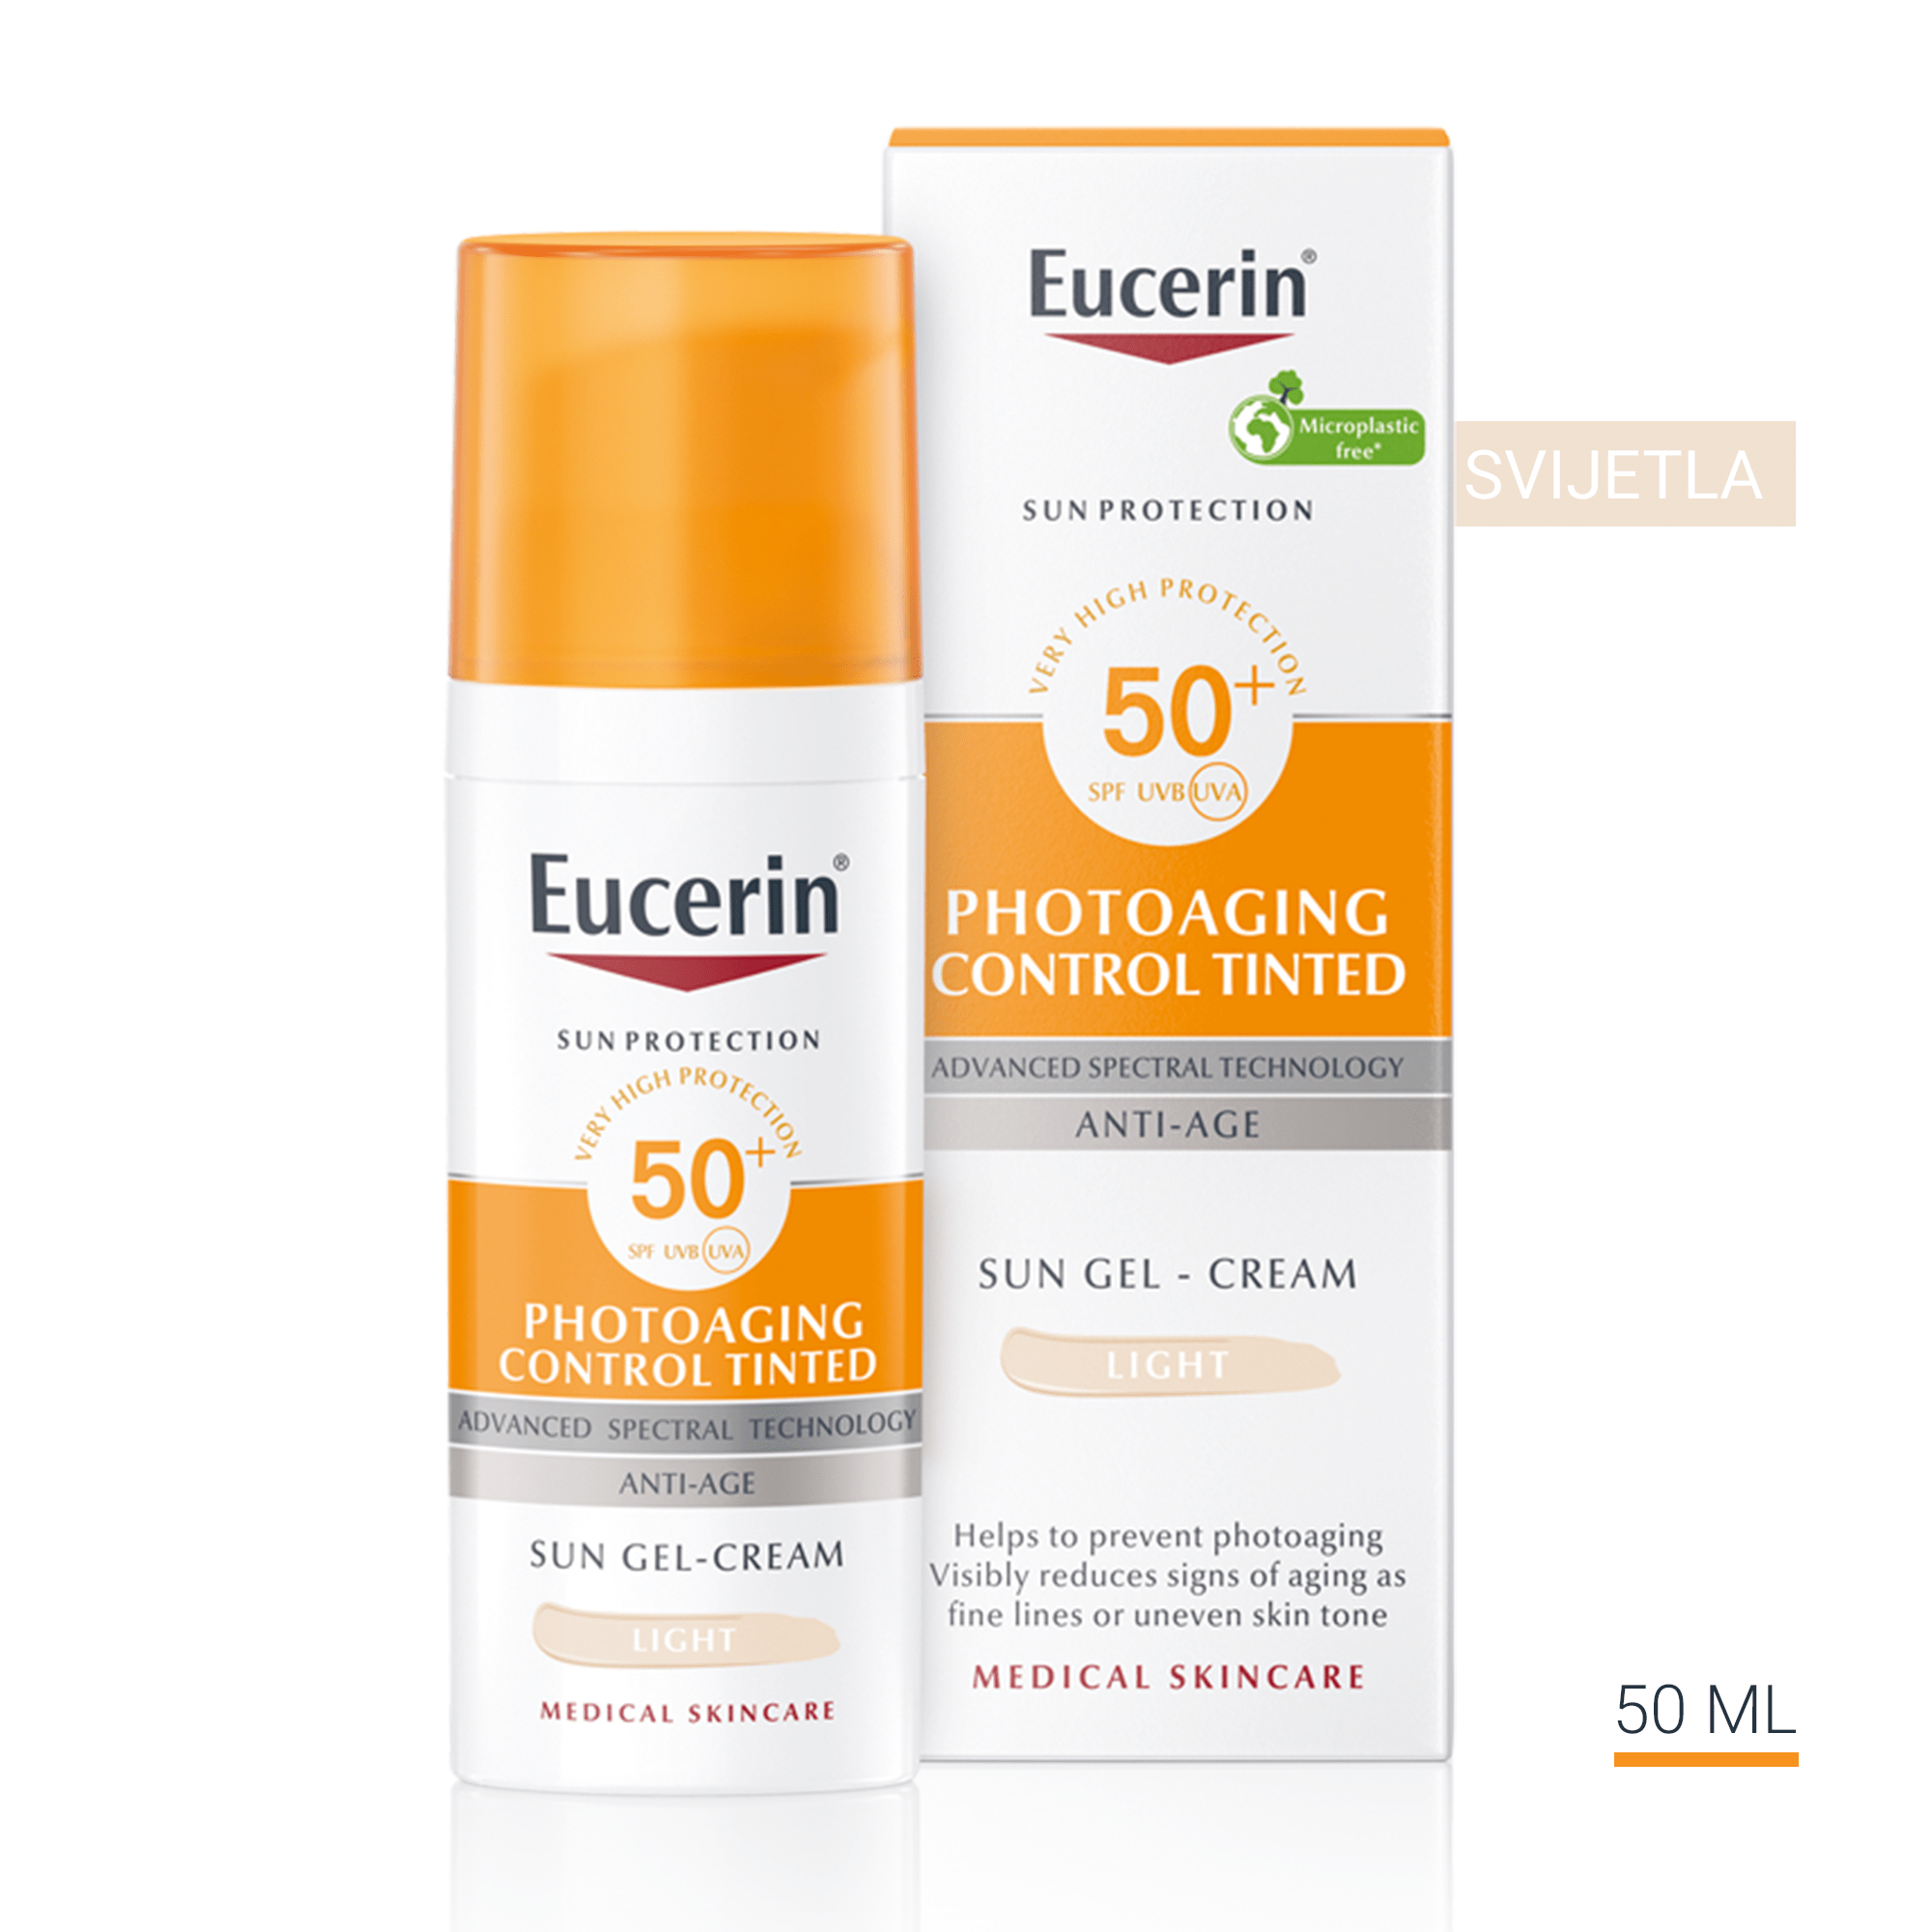 92% of woman say Eucerin Sun Protection Photoaging Control Tinted SPF 50+ Light instantly unifies complexion. 